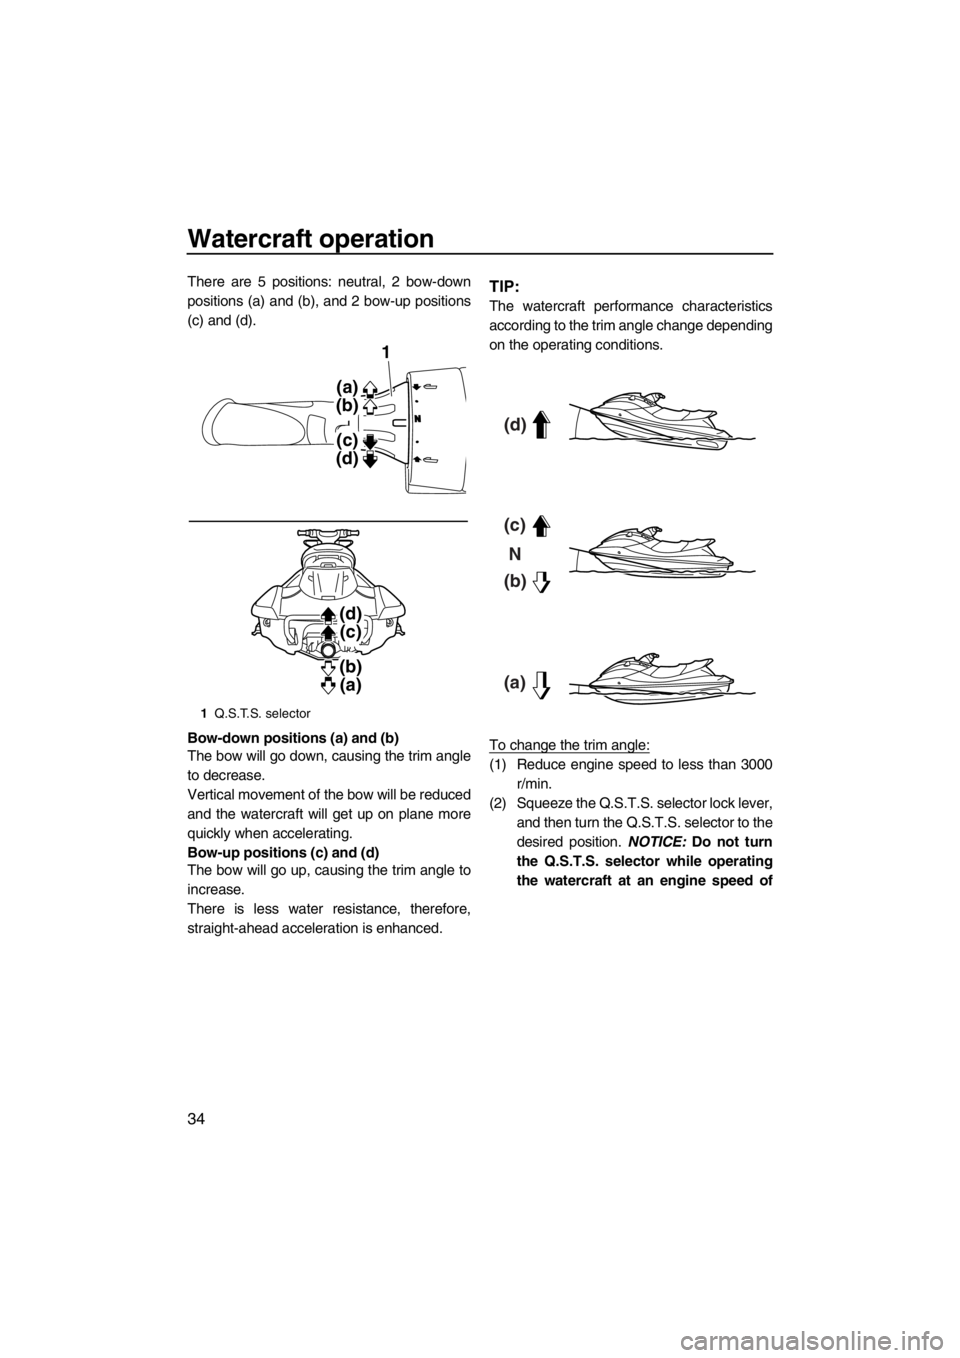 YAMAHA FX SHO 2012 Owners Guide Watercraft operation
34
There are 5 positions: neutral, 2 bow-down
positions (a) and (b), and 2 bow-up positions
(c) and (d).
Bow-down positions (a) and (b)
The bow will go down, causing the trim angl